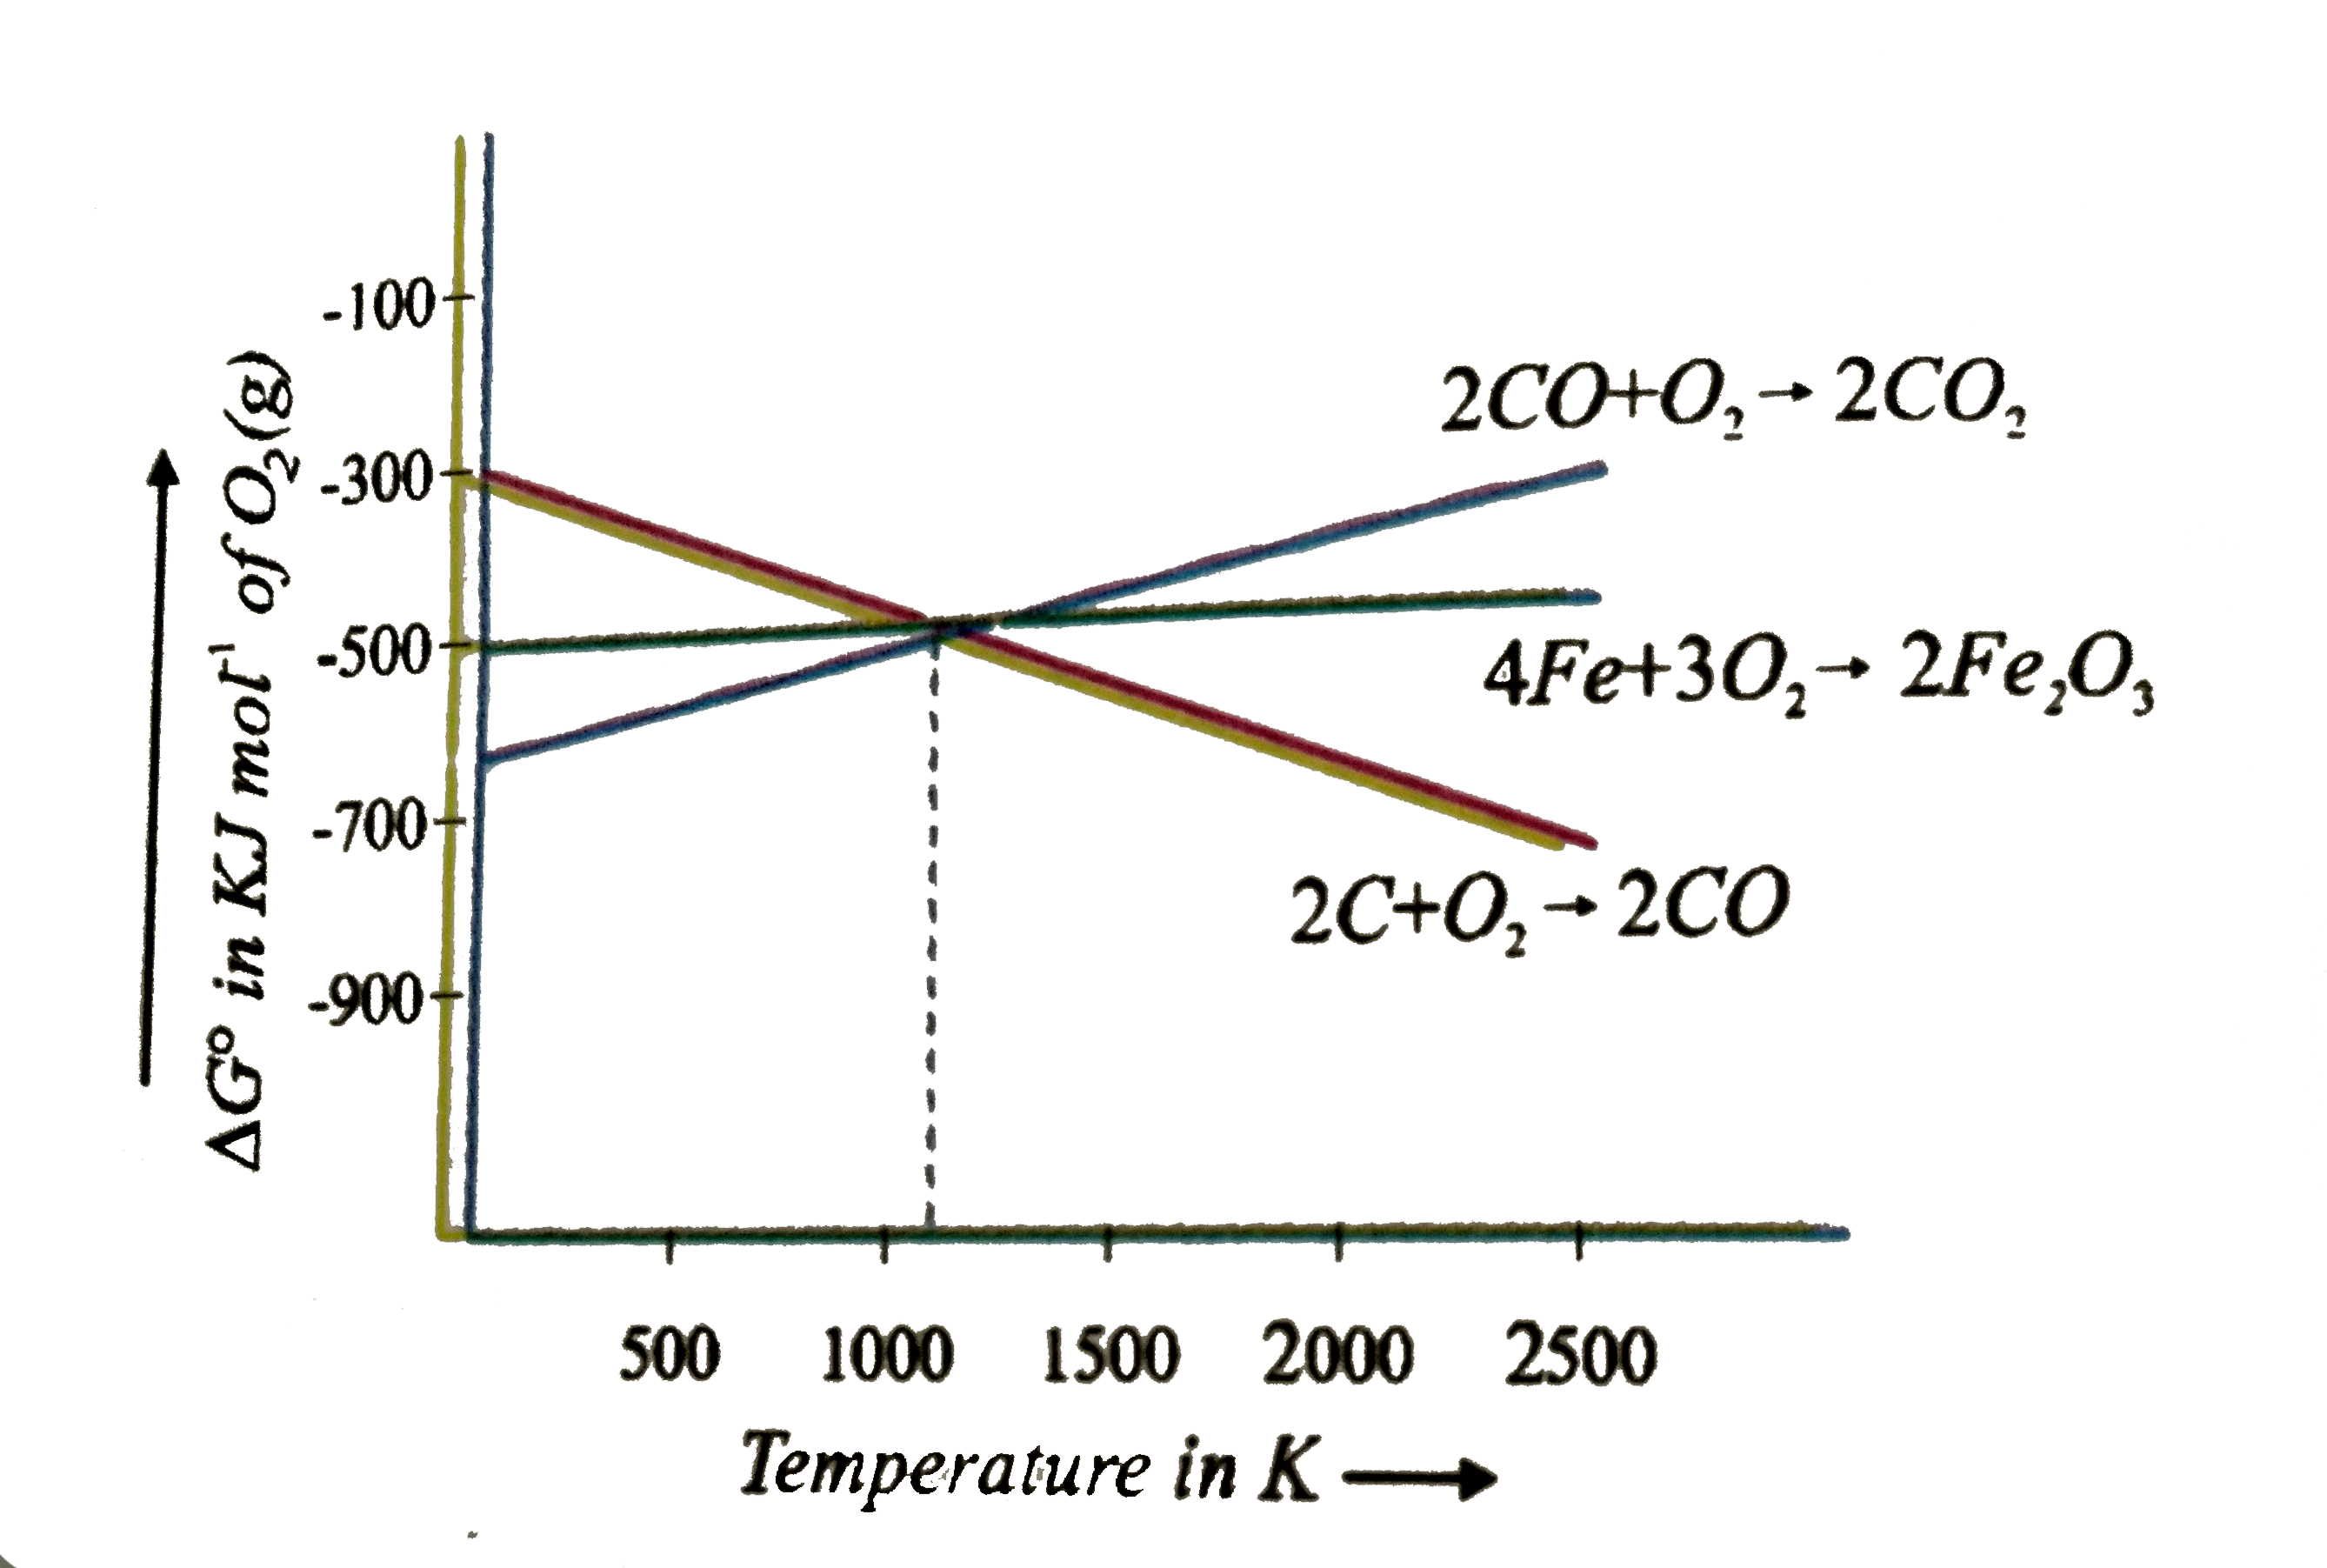 Correct statements from the graph      I) Above 1073 K,DeltaG^(0) for the formation of F(2)O(3) is less negative than DeltaG^(0) for the formation of CO from carbon   II) Above 1073K, Carbon can reduce Fe(2)O(3)   III) Below 1073K, CO can reduce Fe(2)O(3)   IV) In blast furnance, reduction of Fe(2)CO(3) occurs in different temperature ranges with below 1073K by CO (or) above 1073 K by carbon